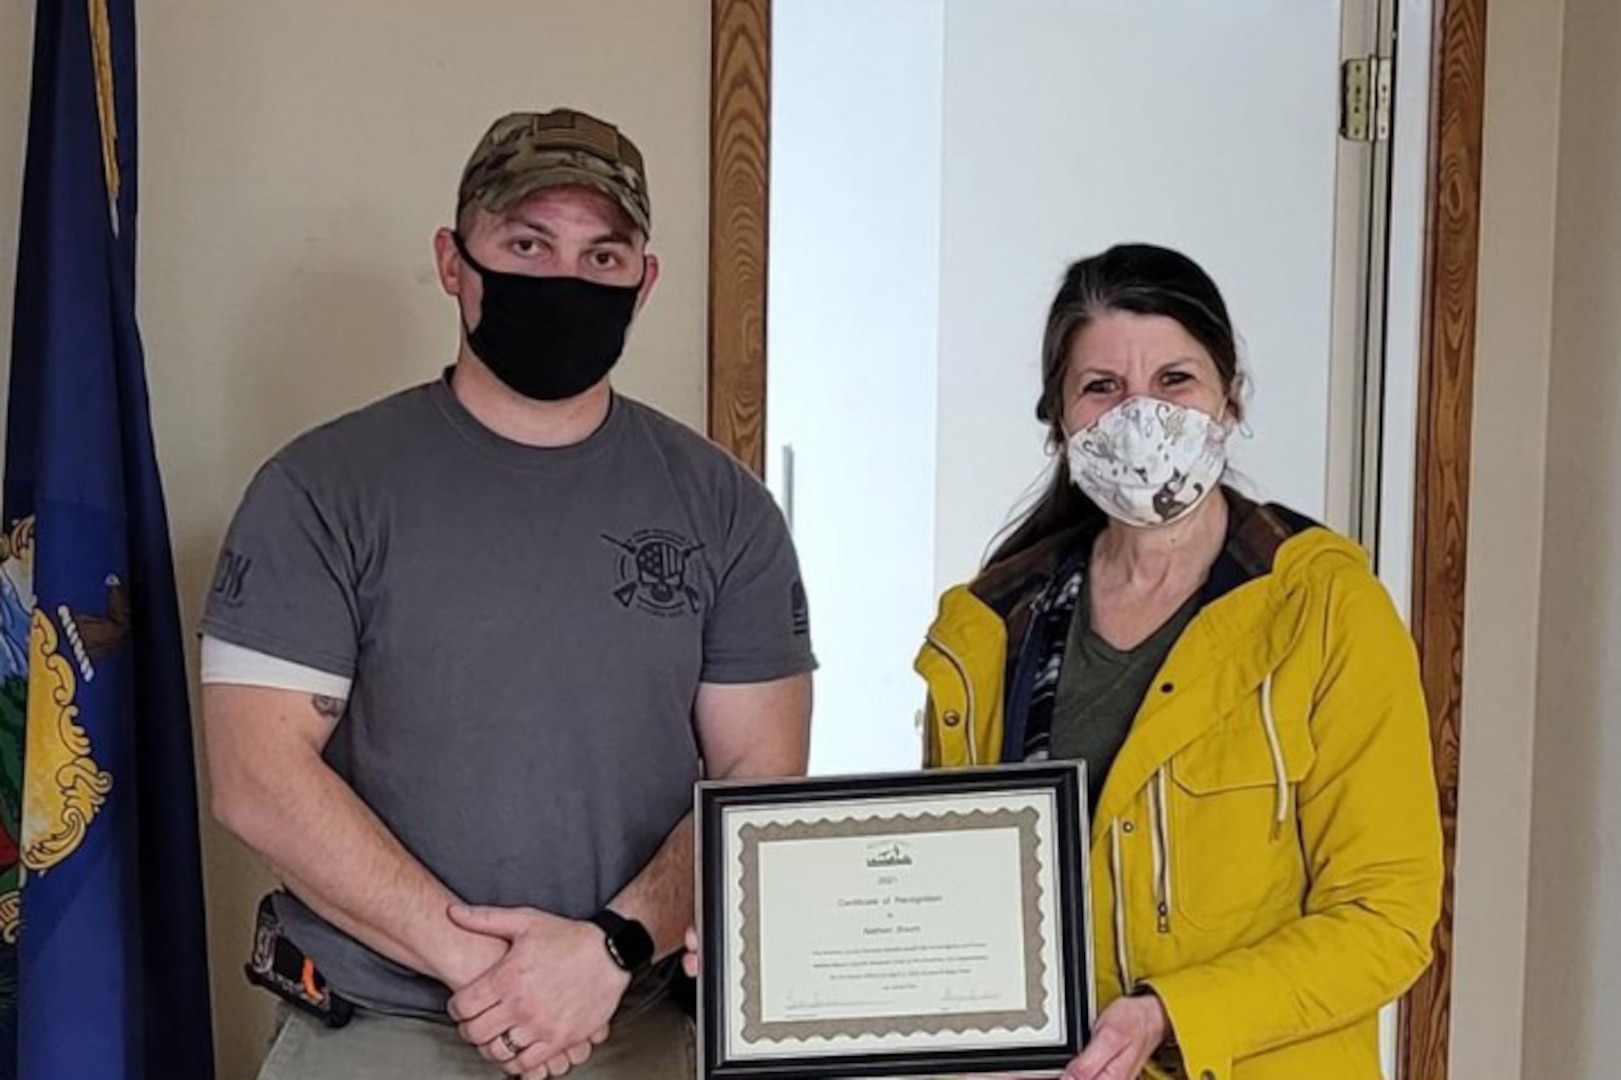 TSgt. Nathan Bourn, a munitions specialist assigned to the 158th Fighter Wing, is recognized by Beth Saradarian, executive director of the Rutland County Humane Society at the Poultney Fire Department, Poultney, VT.